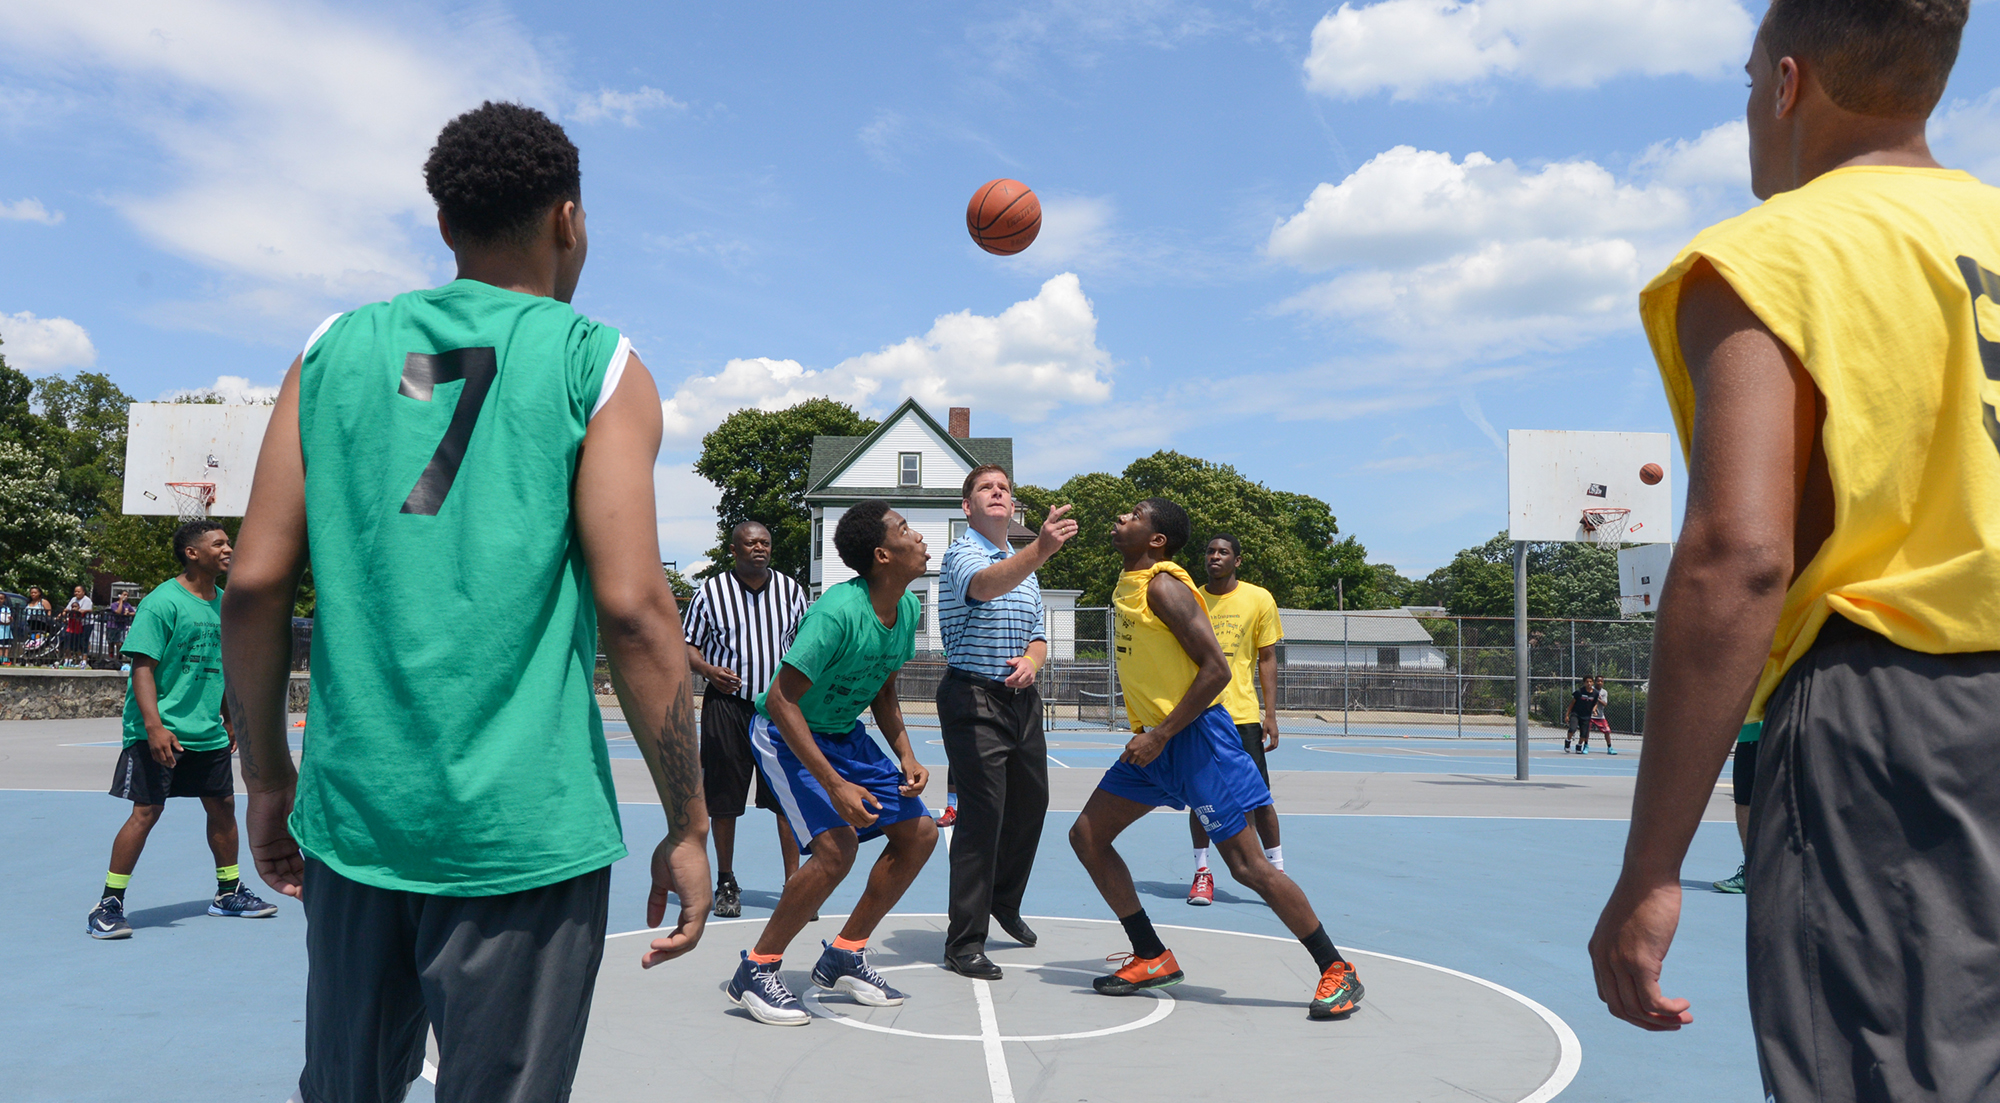 Image for mayor walsh throws the opening tip off for the 2014 youth in crisis scoops for hoops event in mattapan